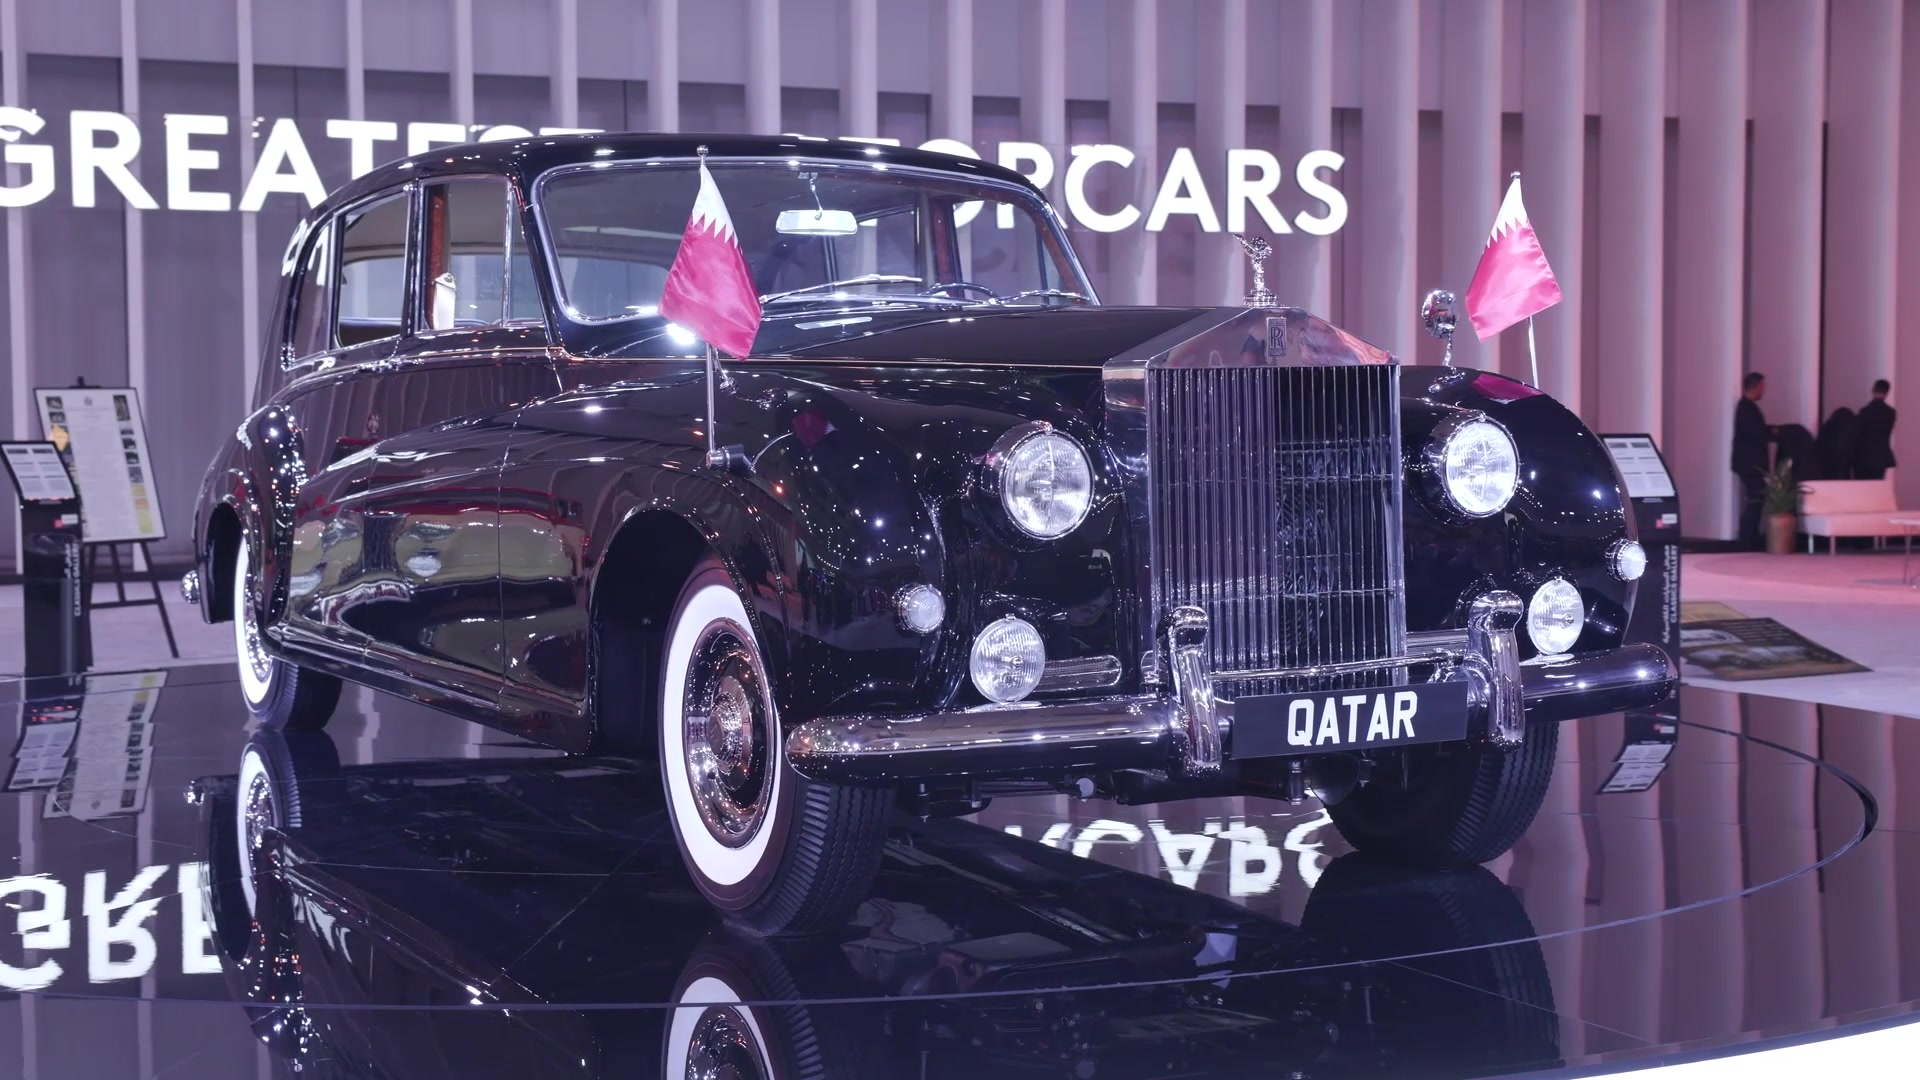 Geneva International Motor Show Qatar 2023 – On display at the ‘GIMS Qatar Classics Gallery’ are automotive jewels from world-renowned car collections